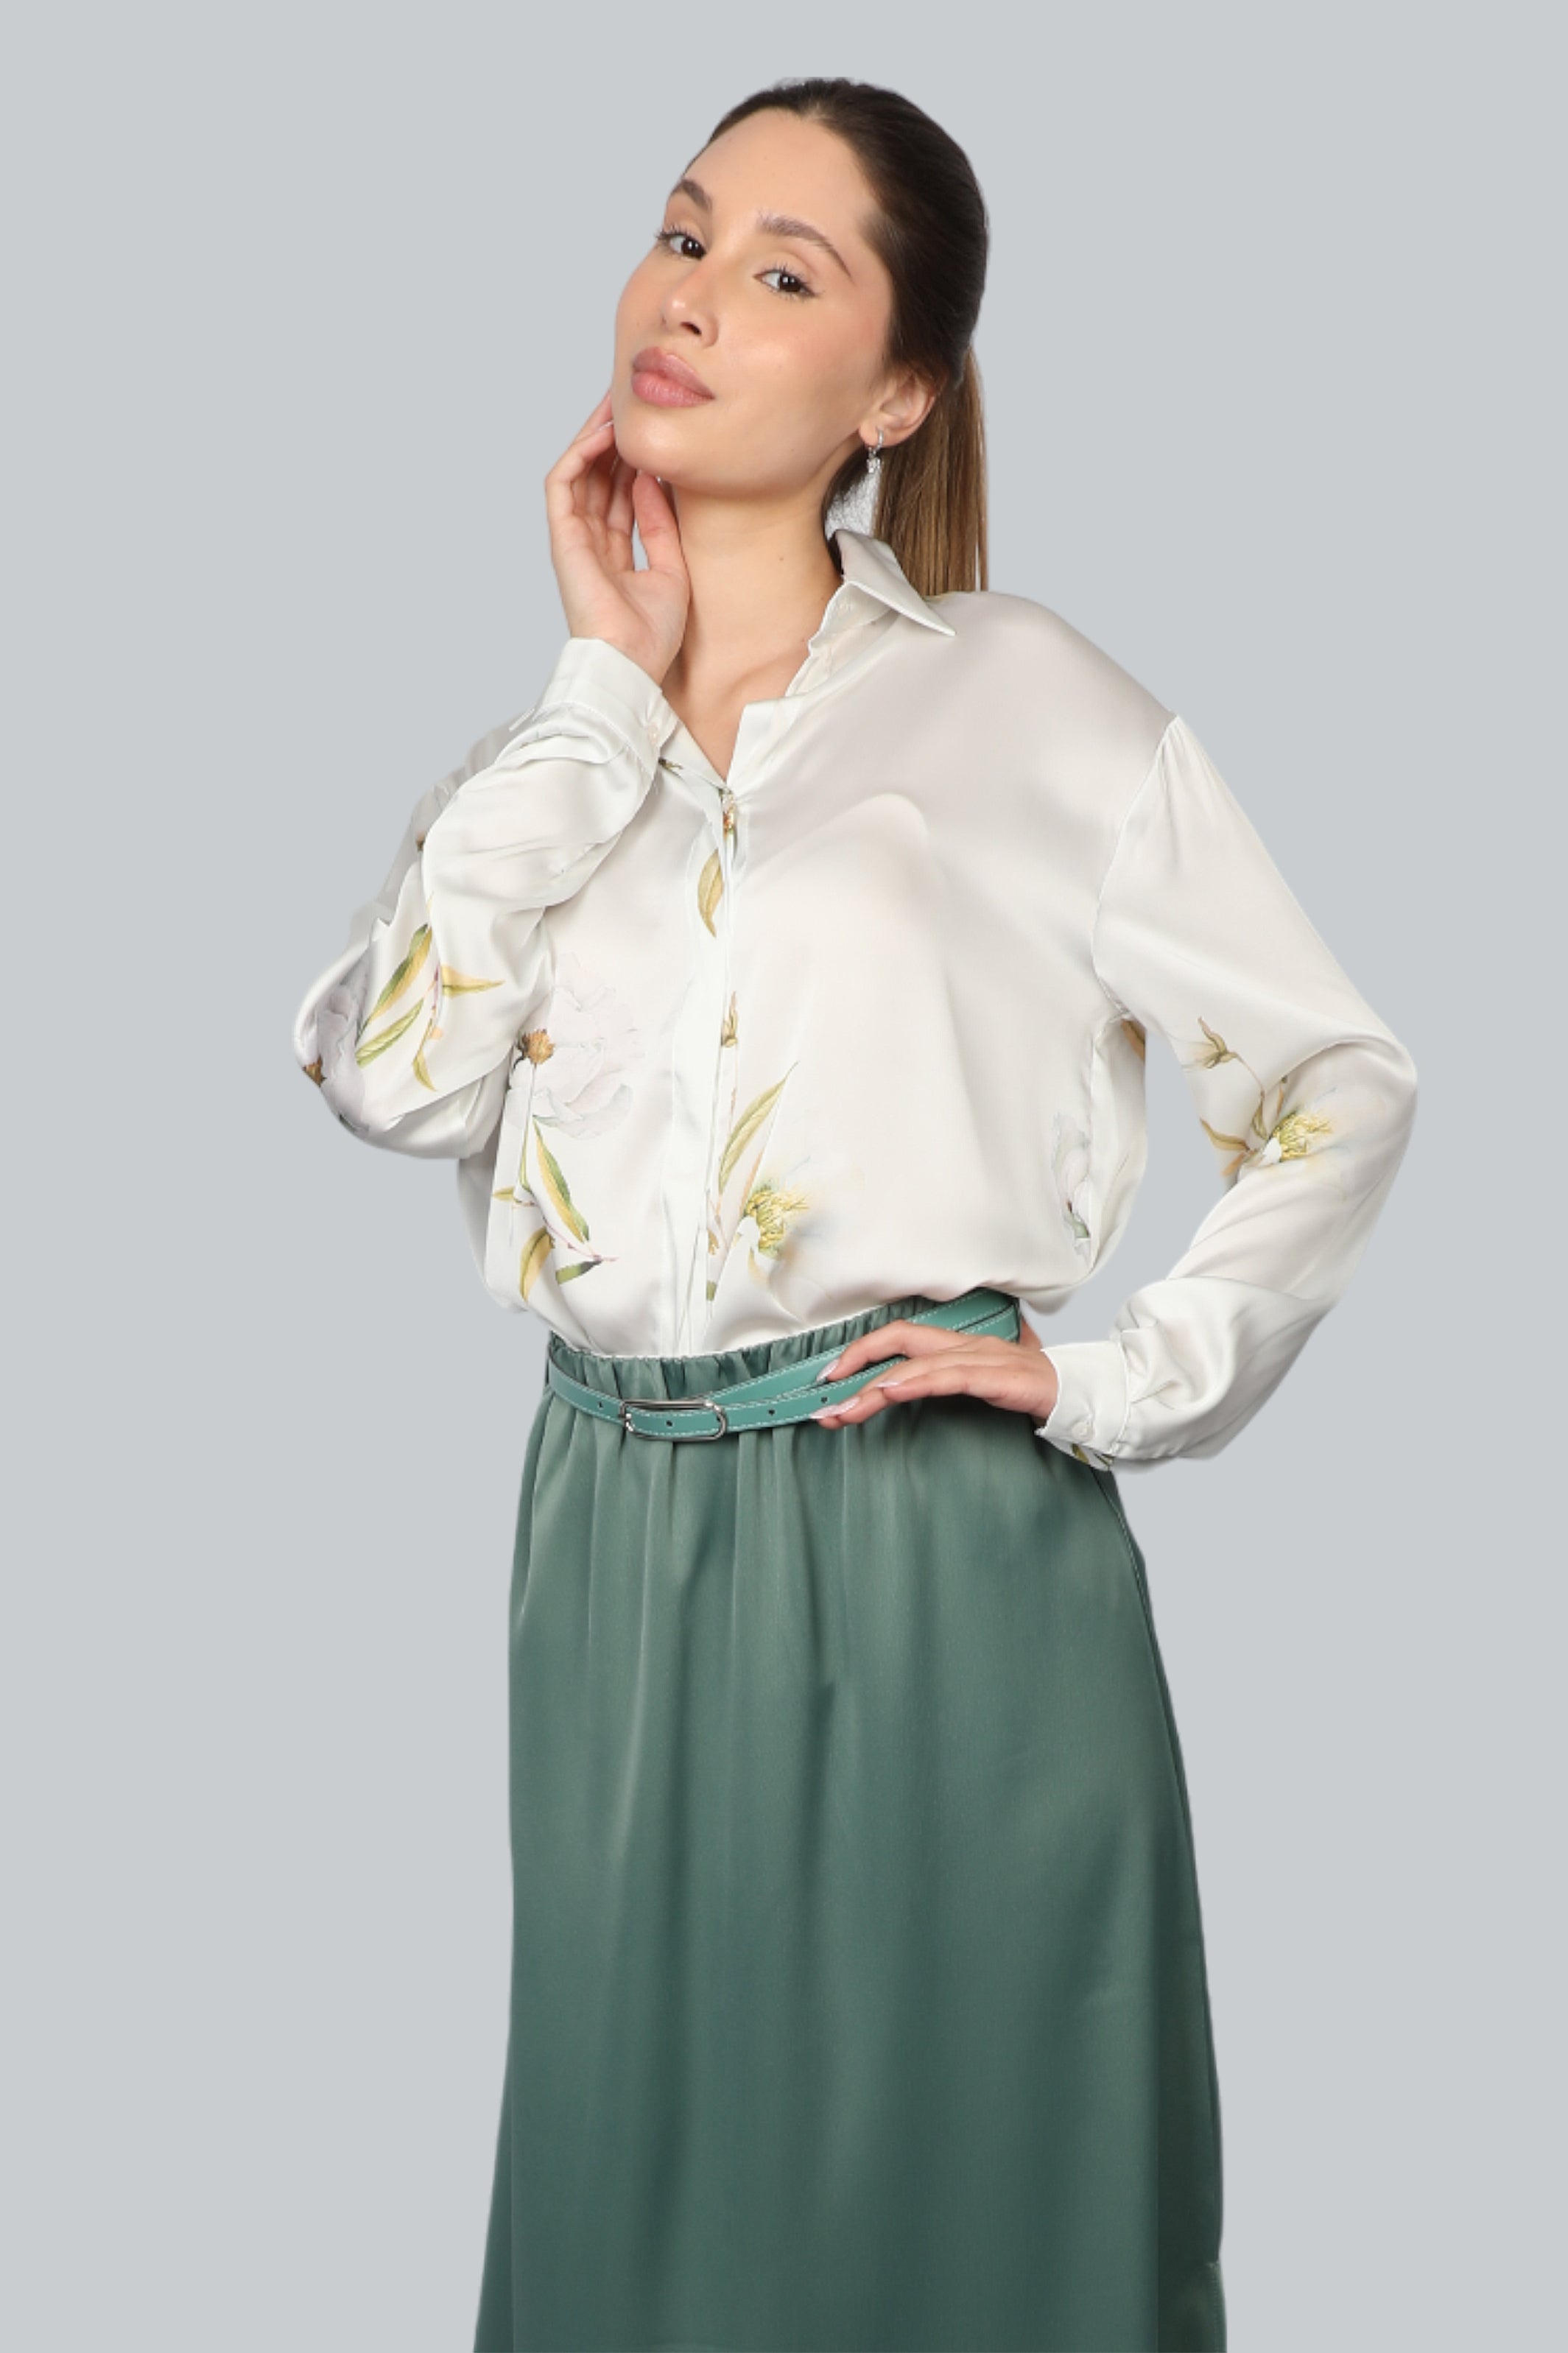 Women Shirt Long Sleeves With Simple Flower Design